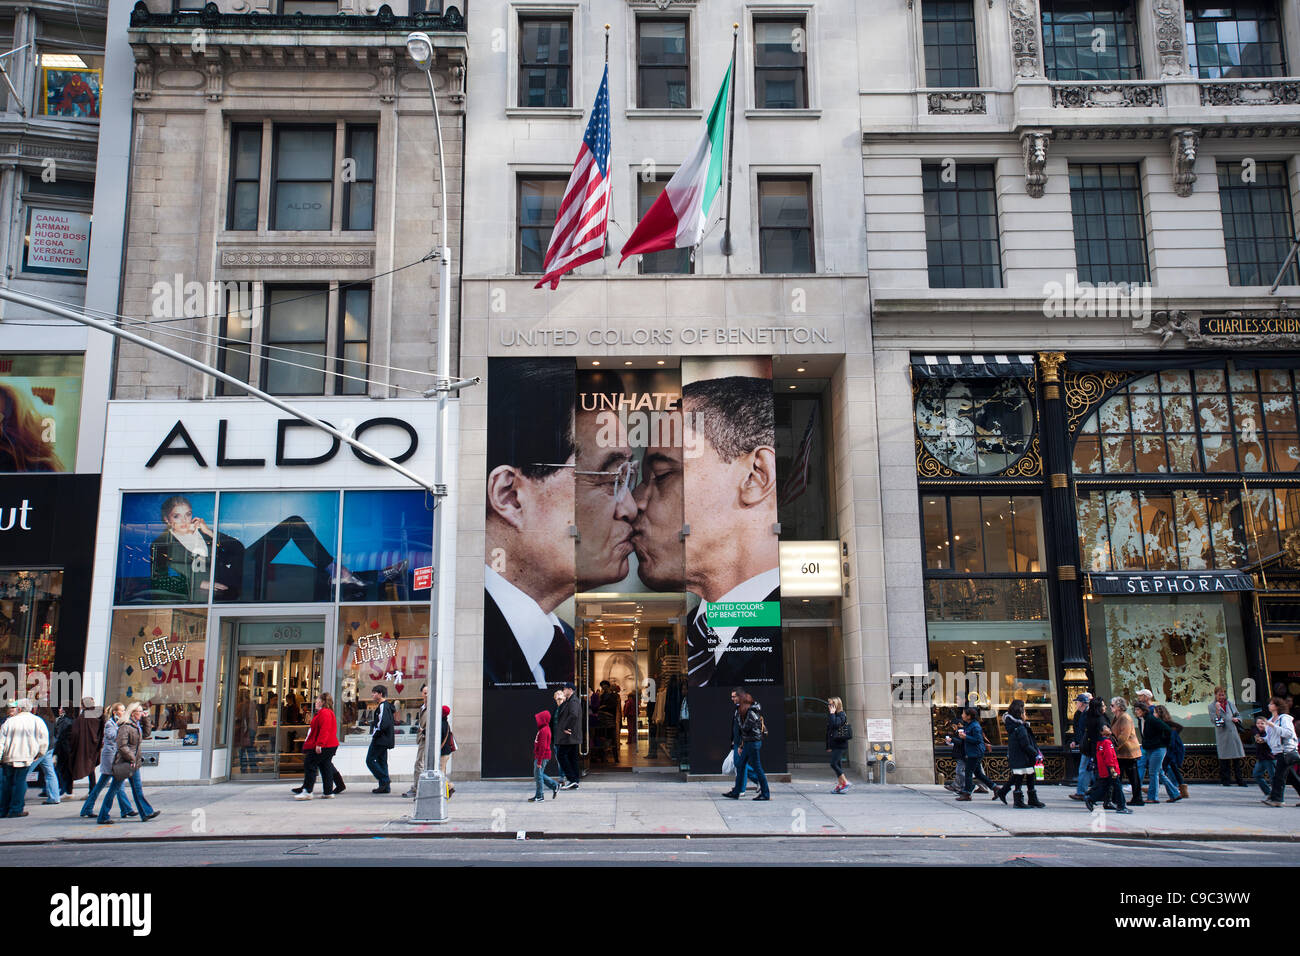 The Benetton store on Fifth Avenue in New York, seen on Sunday, November 20, 2011, displays a doctored photograph of US Pres. Barack Obama kissing China Pres. Hu Jintao as part of the company's 'Unhate' advertising campaign. Stock Photo